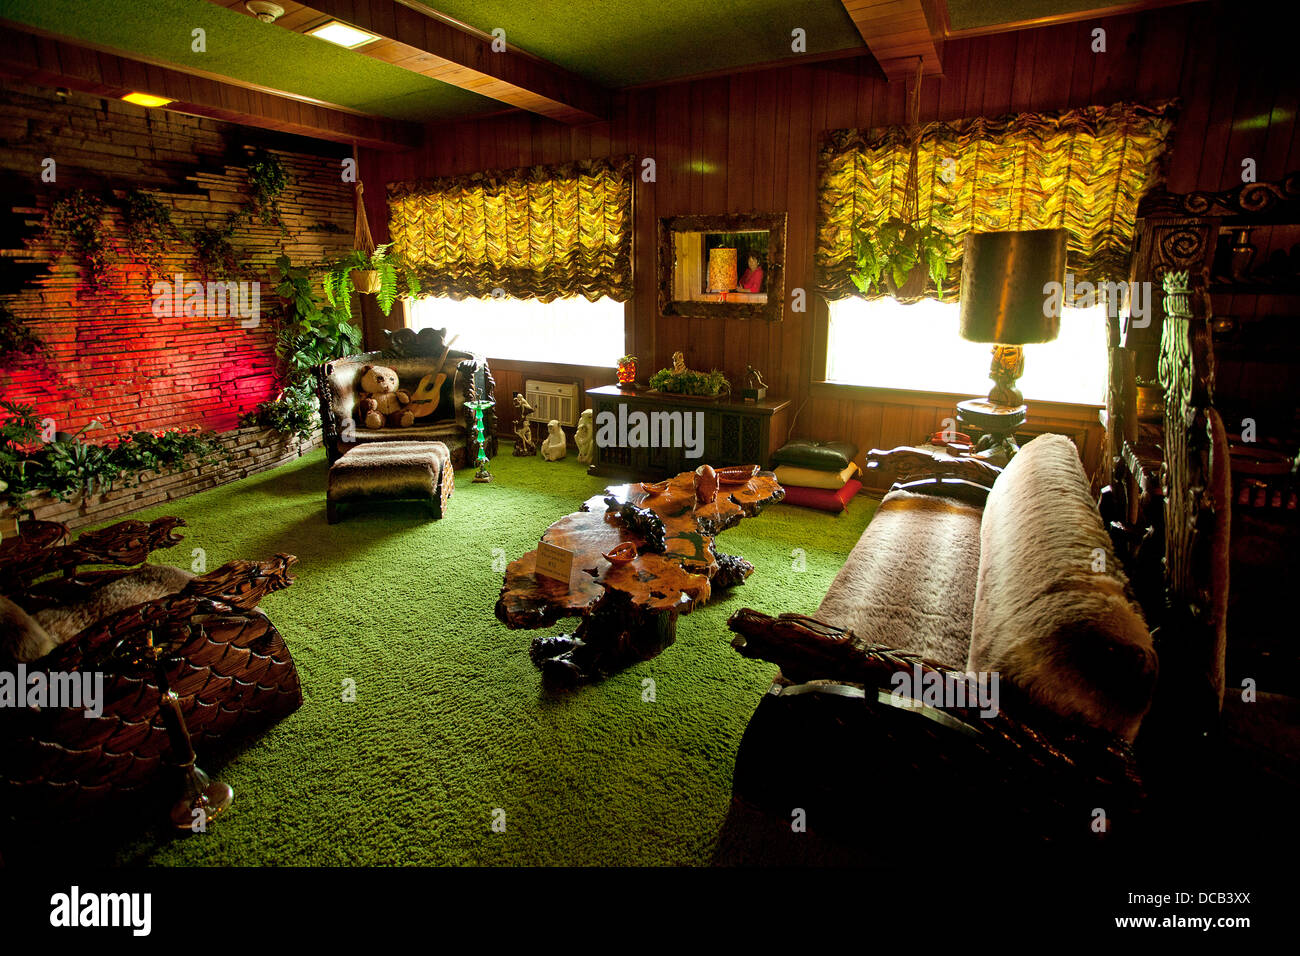 The Jungle Room at Graceland the home of Elvis Presley in Memphis Tennessee USA Stock Photo